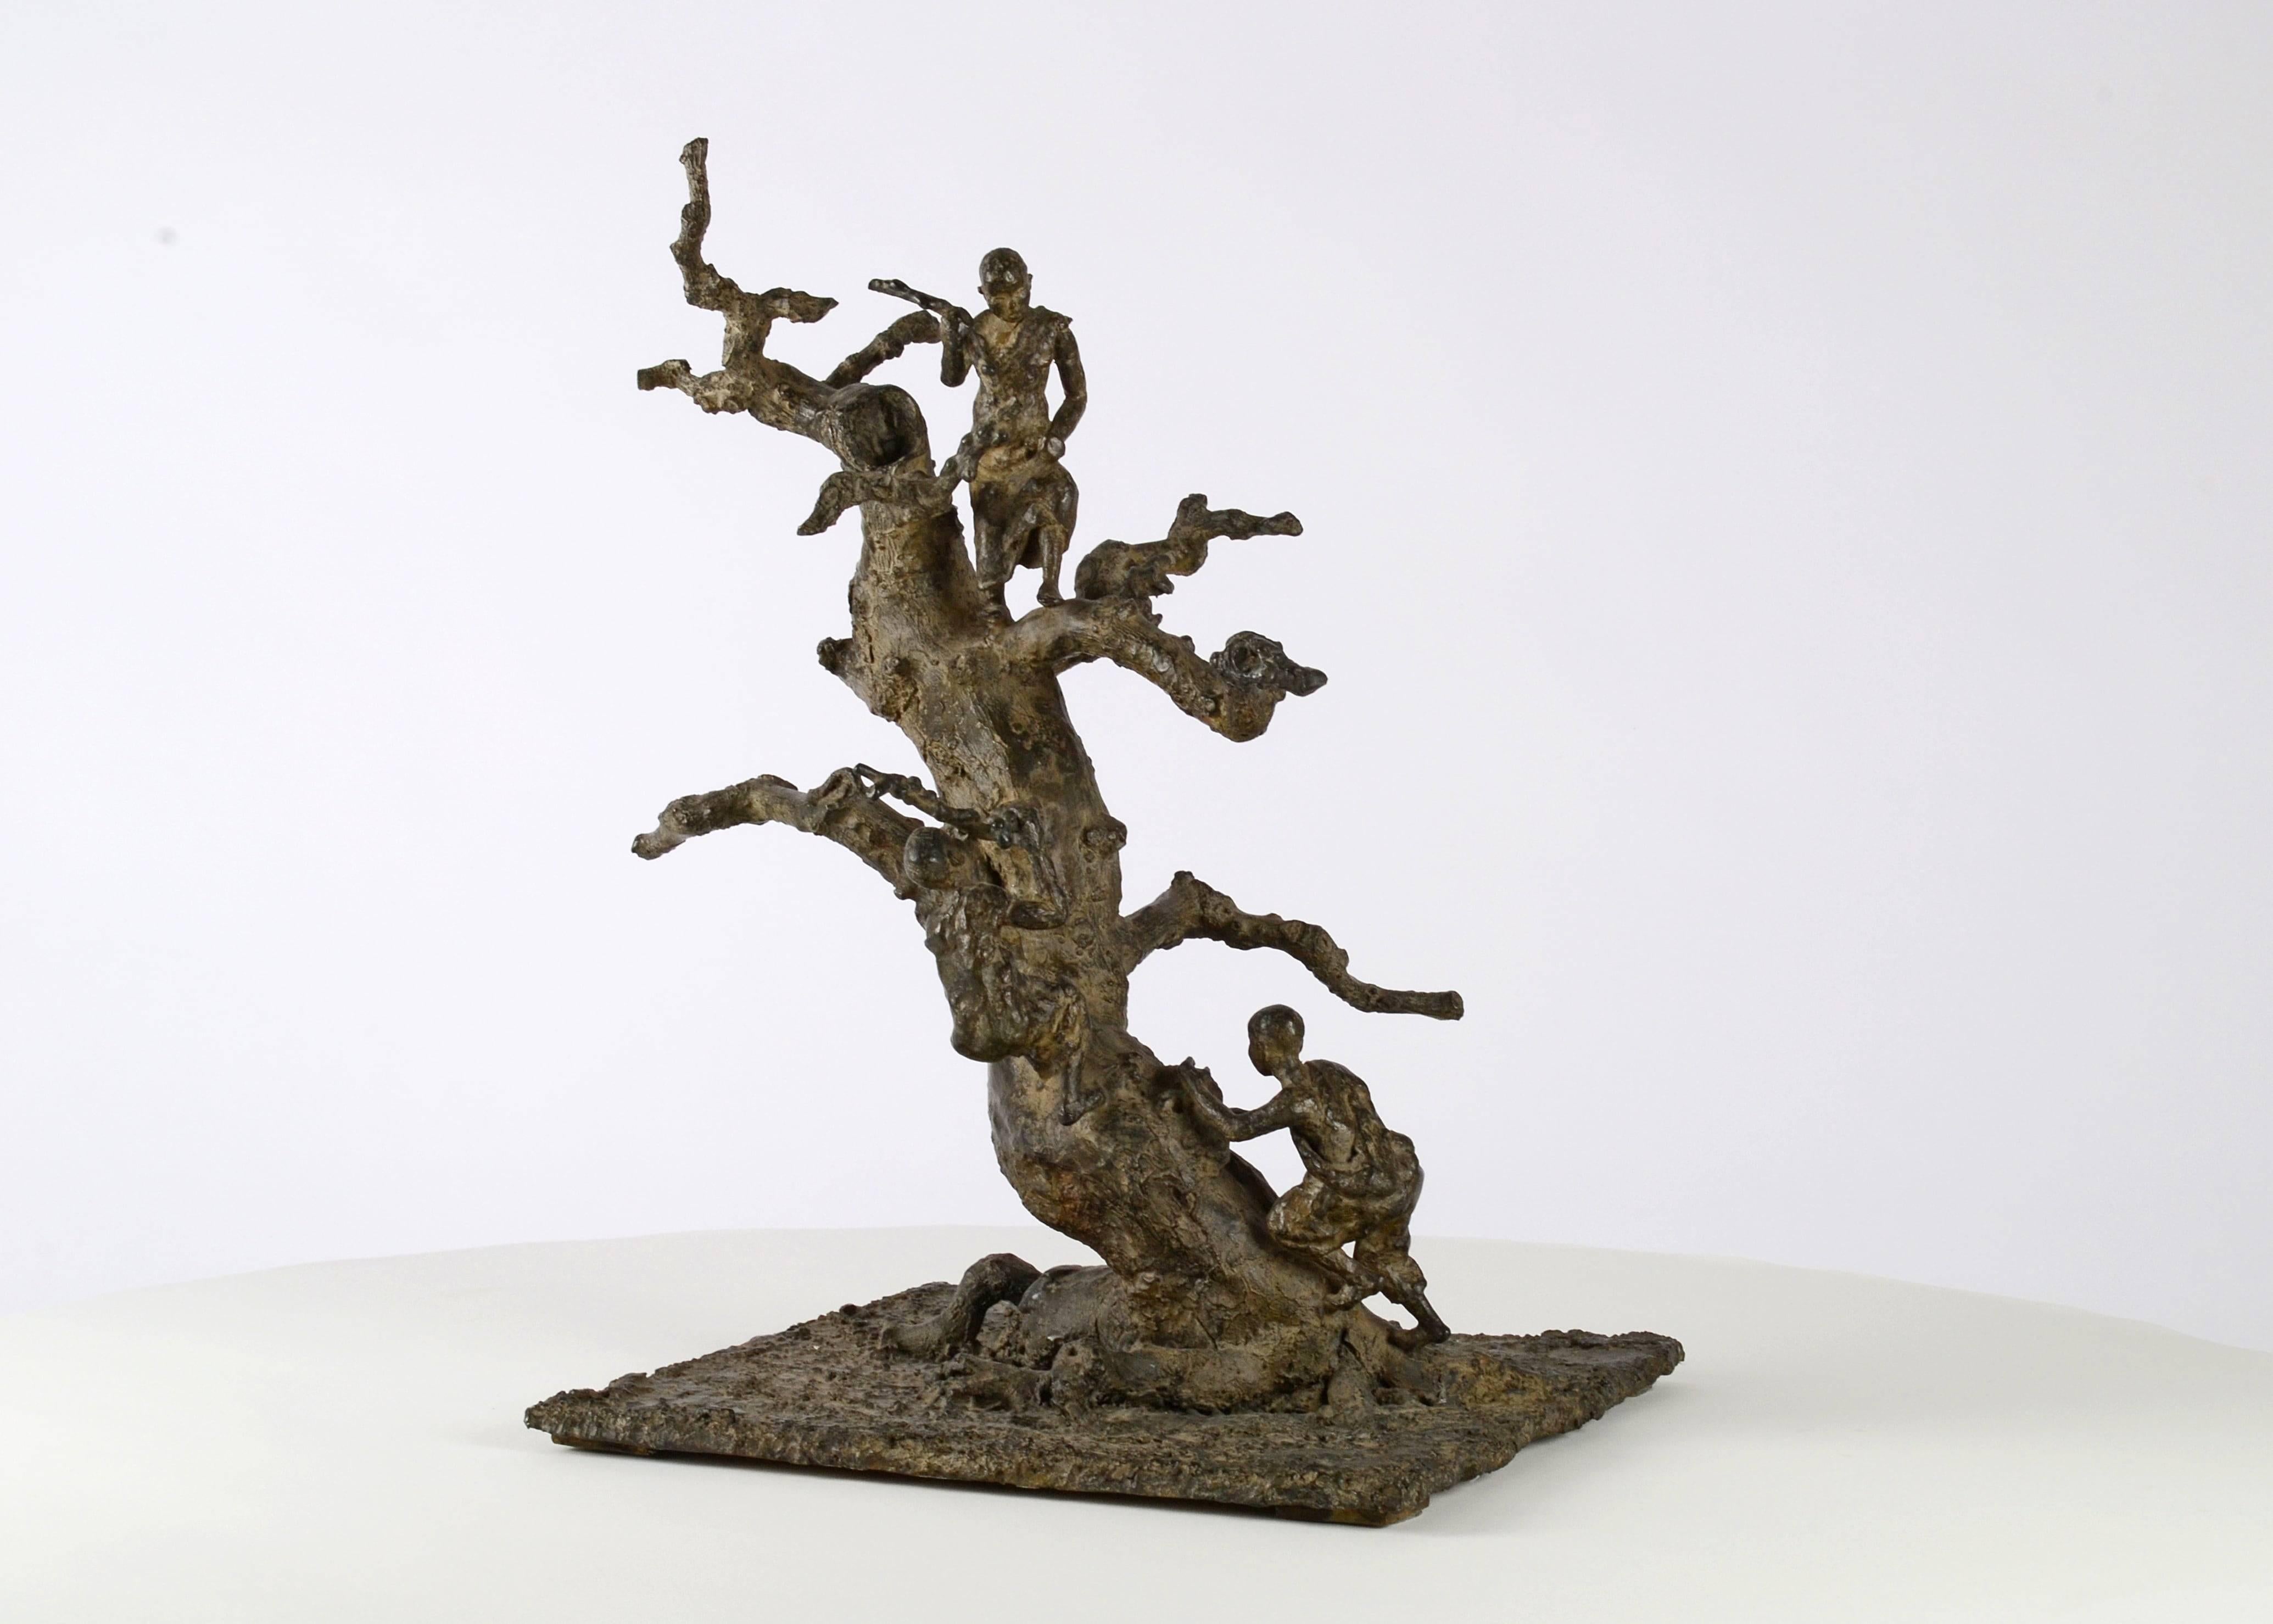 Tree With Children (Arbre aux Enfants) is a bronze sculpture by French contemporary artist Marine de Soos. It represents three young boys climbing a tree. This sculpture is part of the “Figure” series. It is available in a limited edition of 8